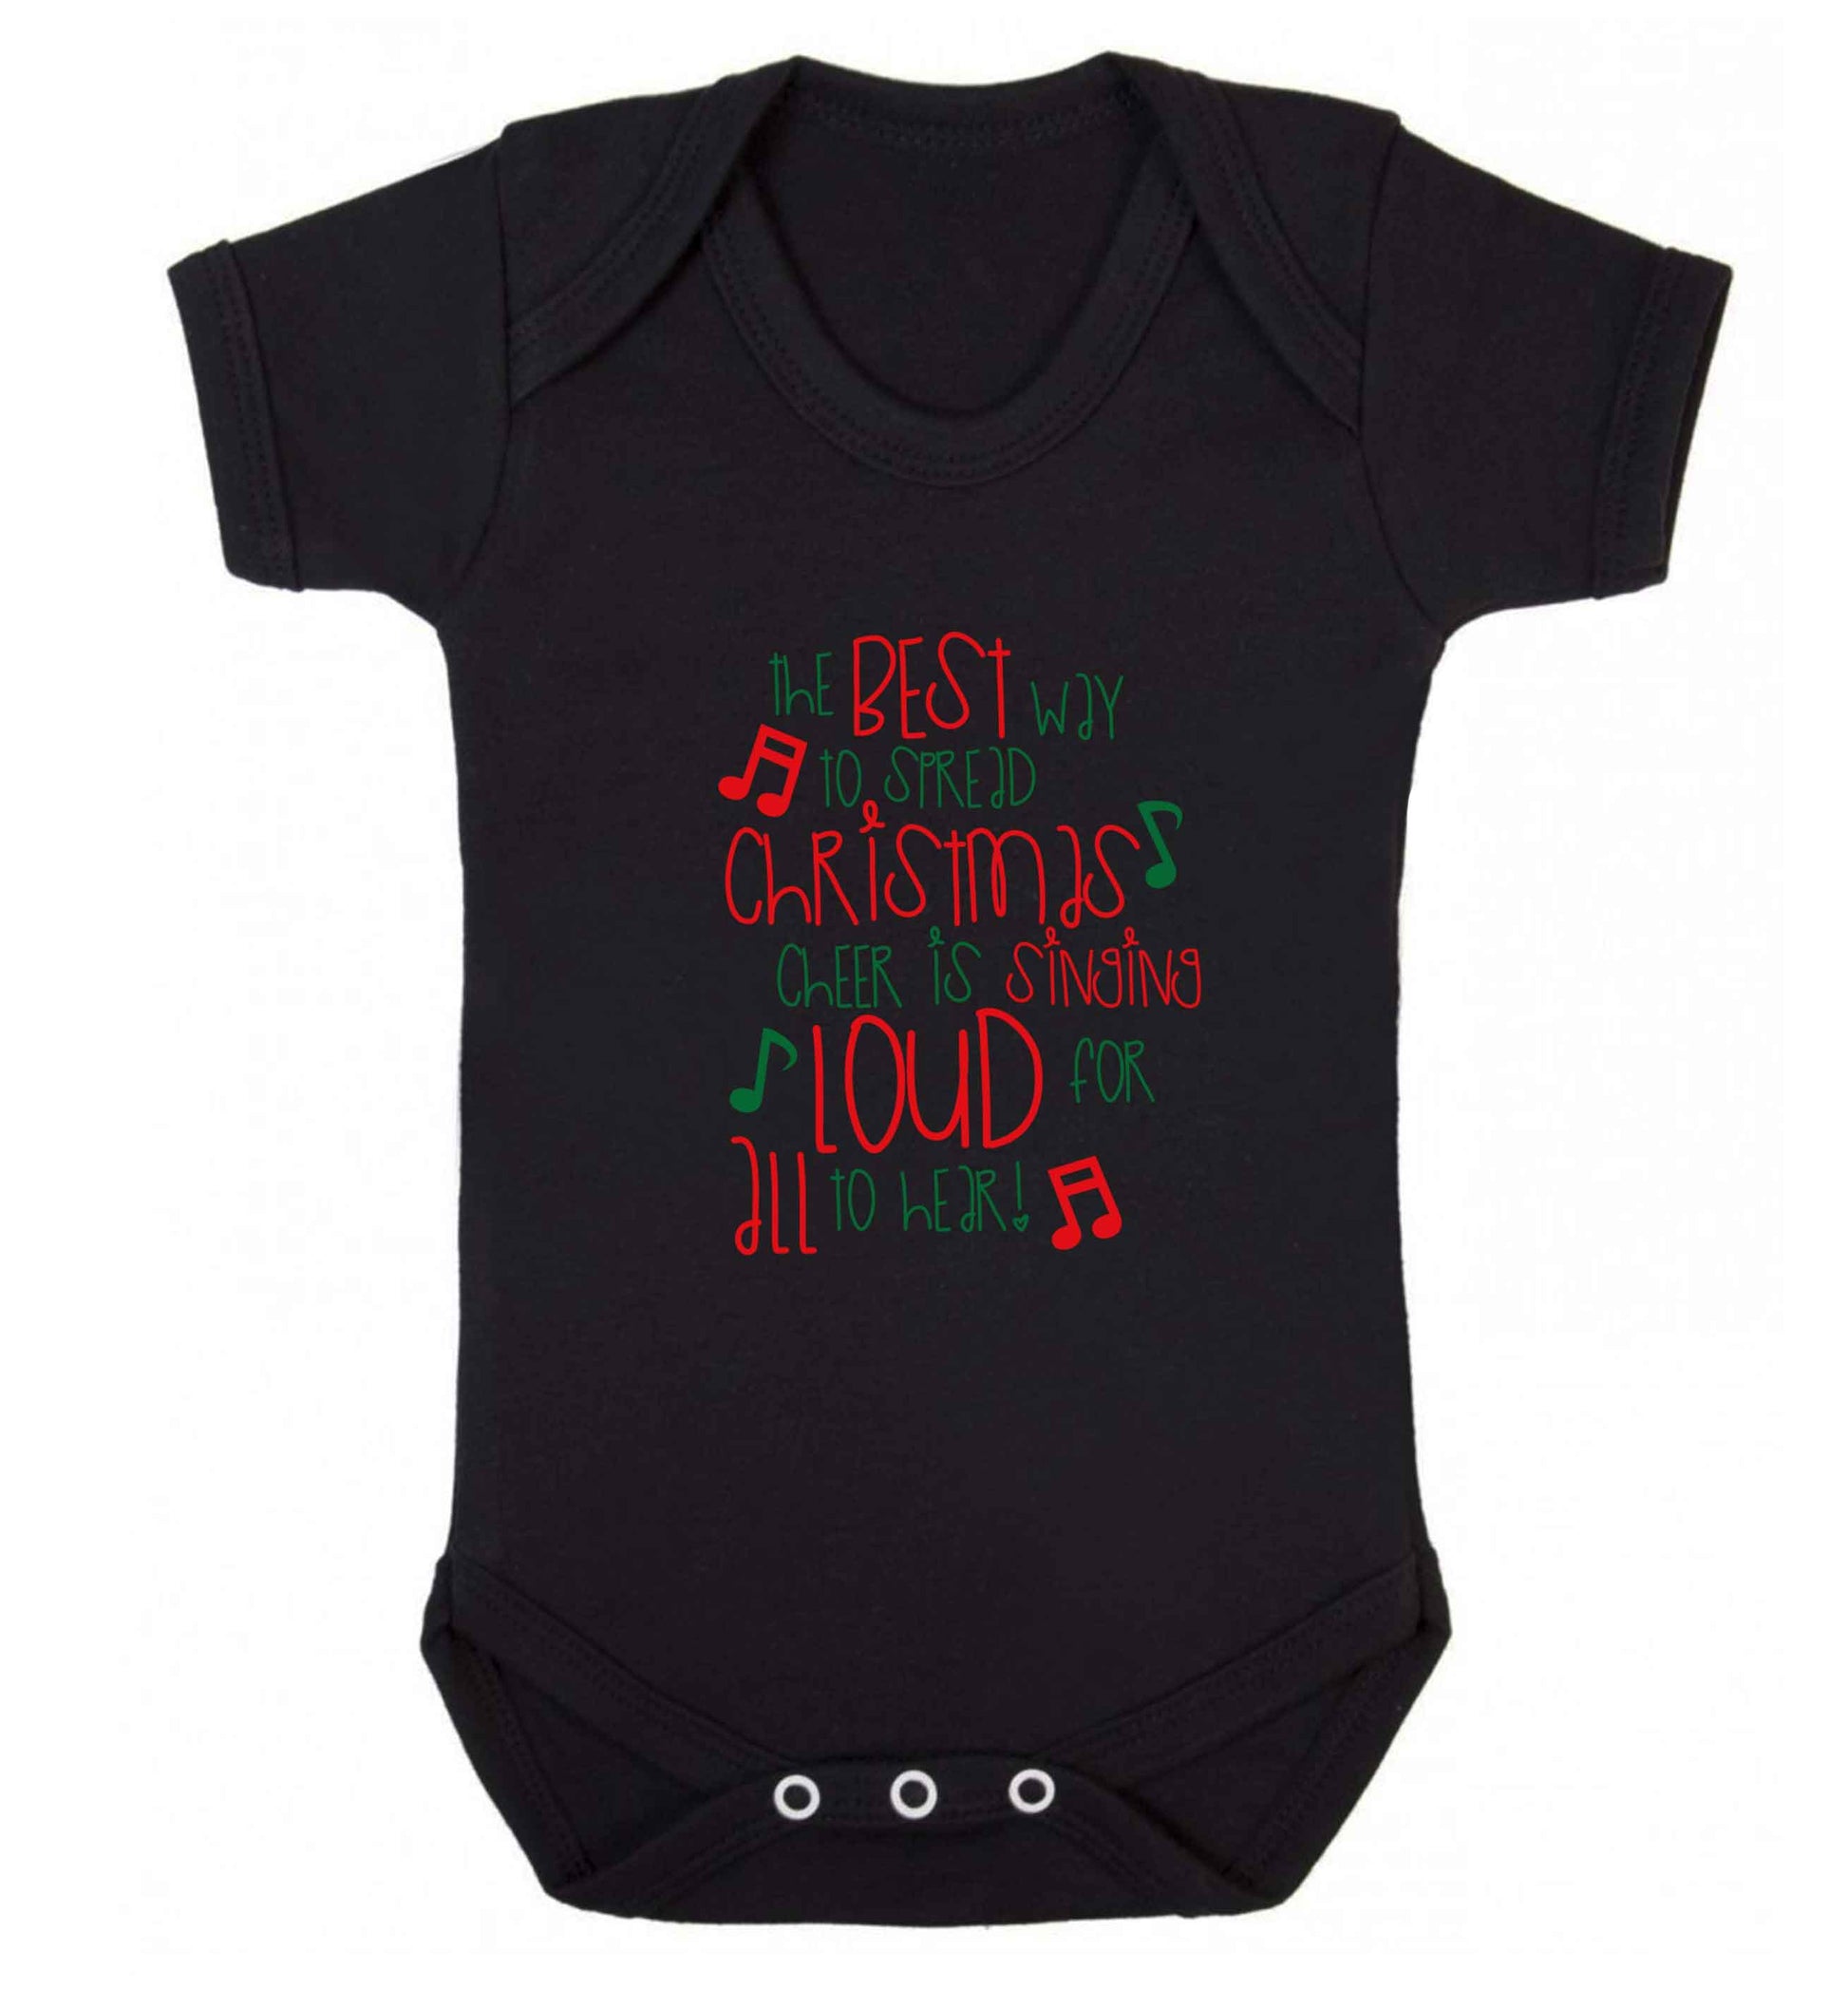 The best way to spread Christmas cheer is singing loud for all to hear baby vest black 18-24 months